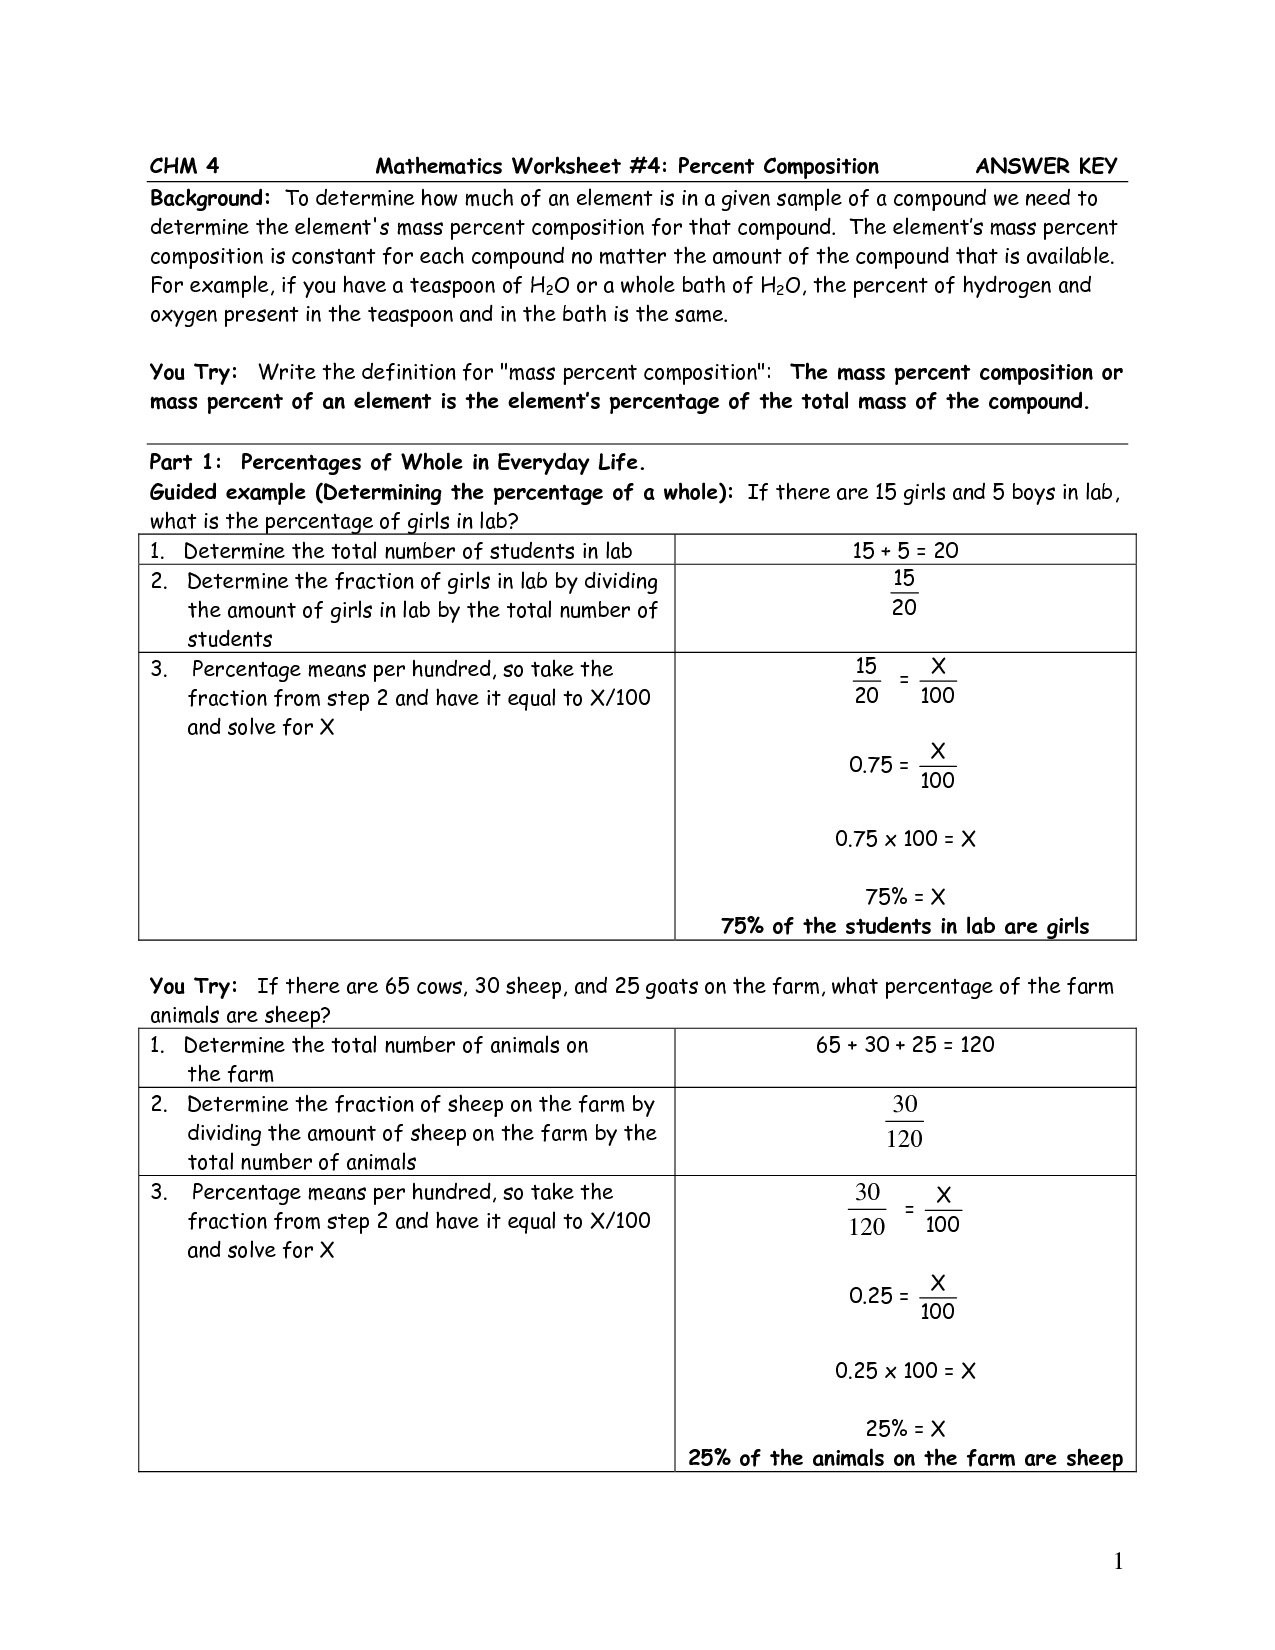 16-best-images-of-computer-history-questions-and-answers-worksheet-computer-basics-worksheet